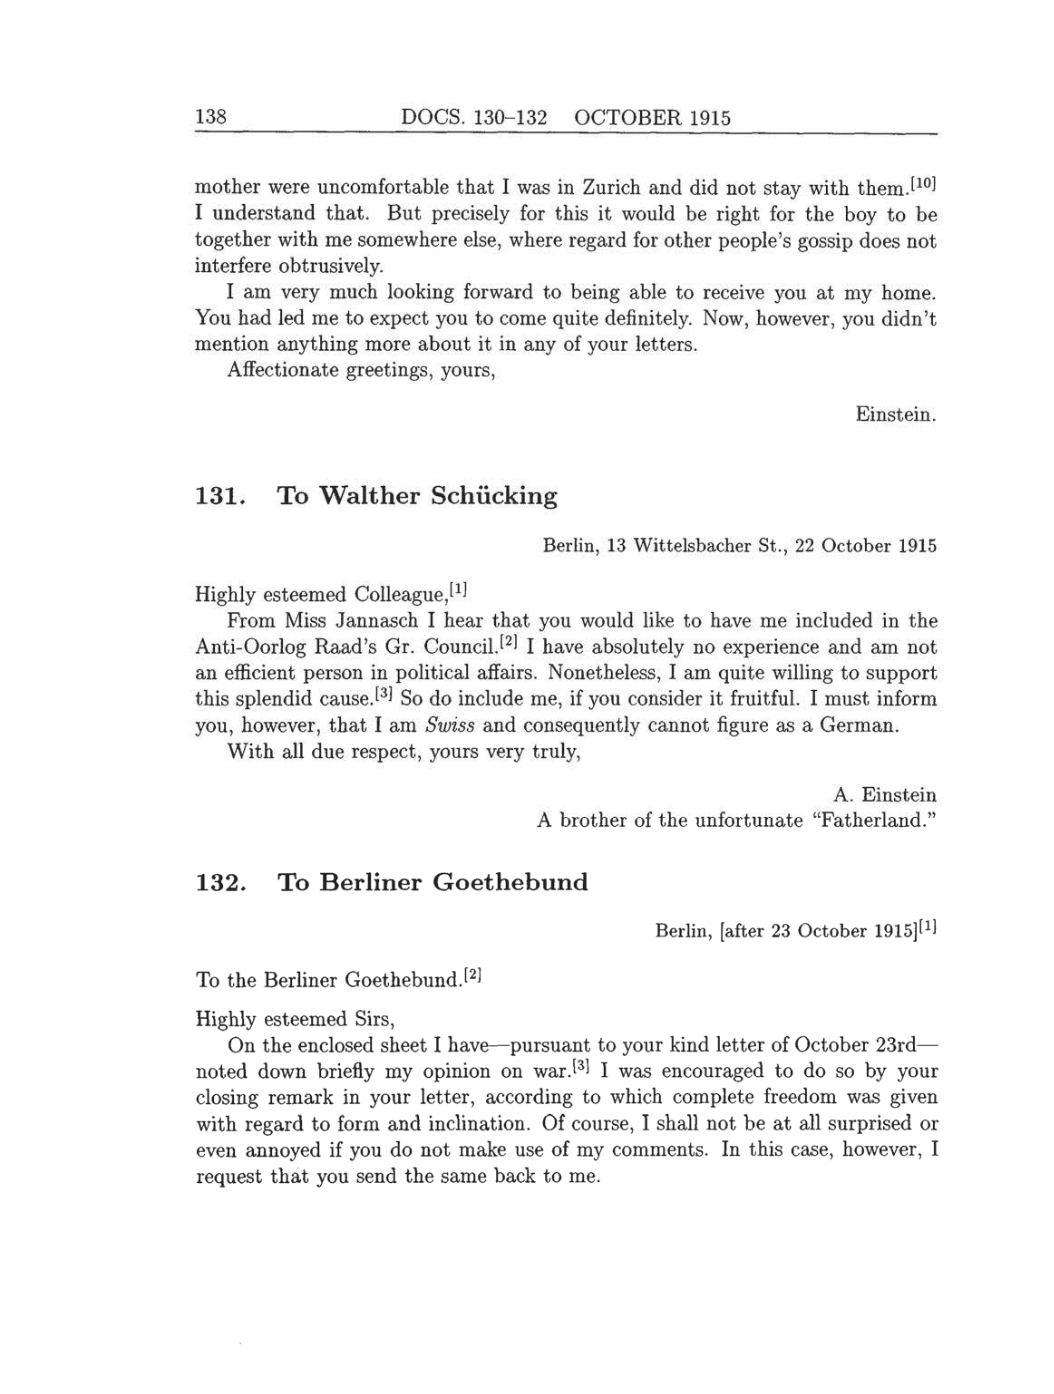 Volume 8: The Berlin Years: Correspondence, 1914-1918 (English translation supplement) page 138